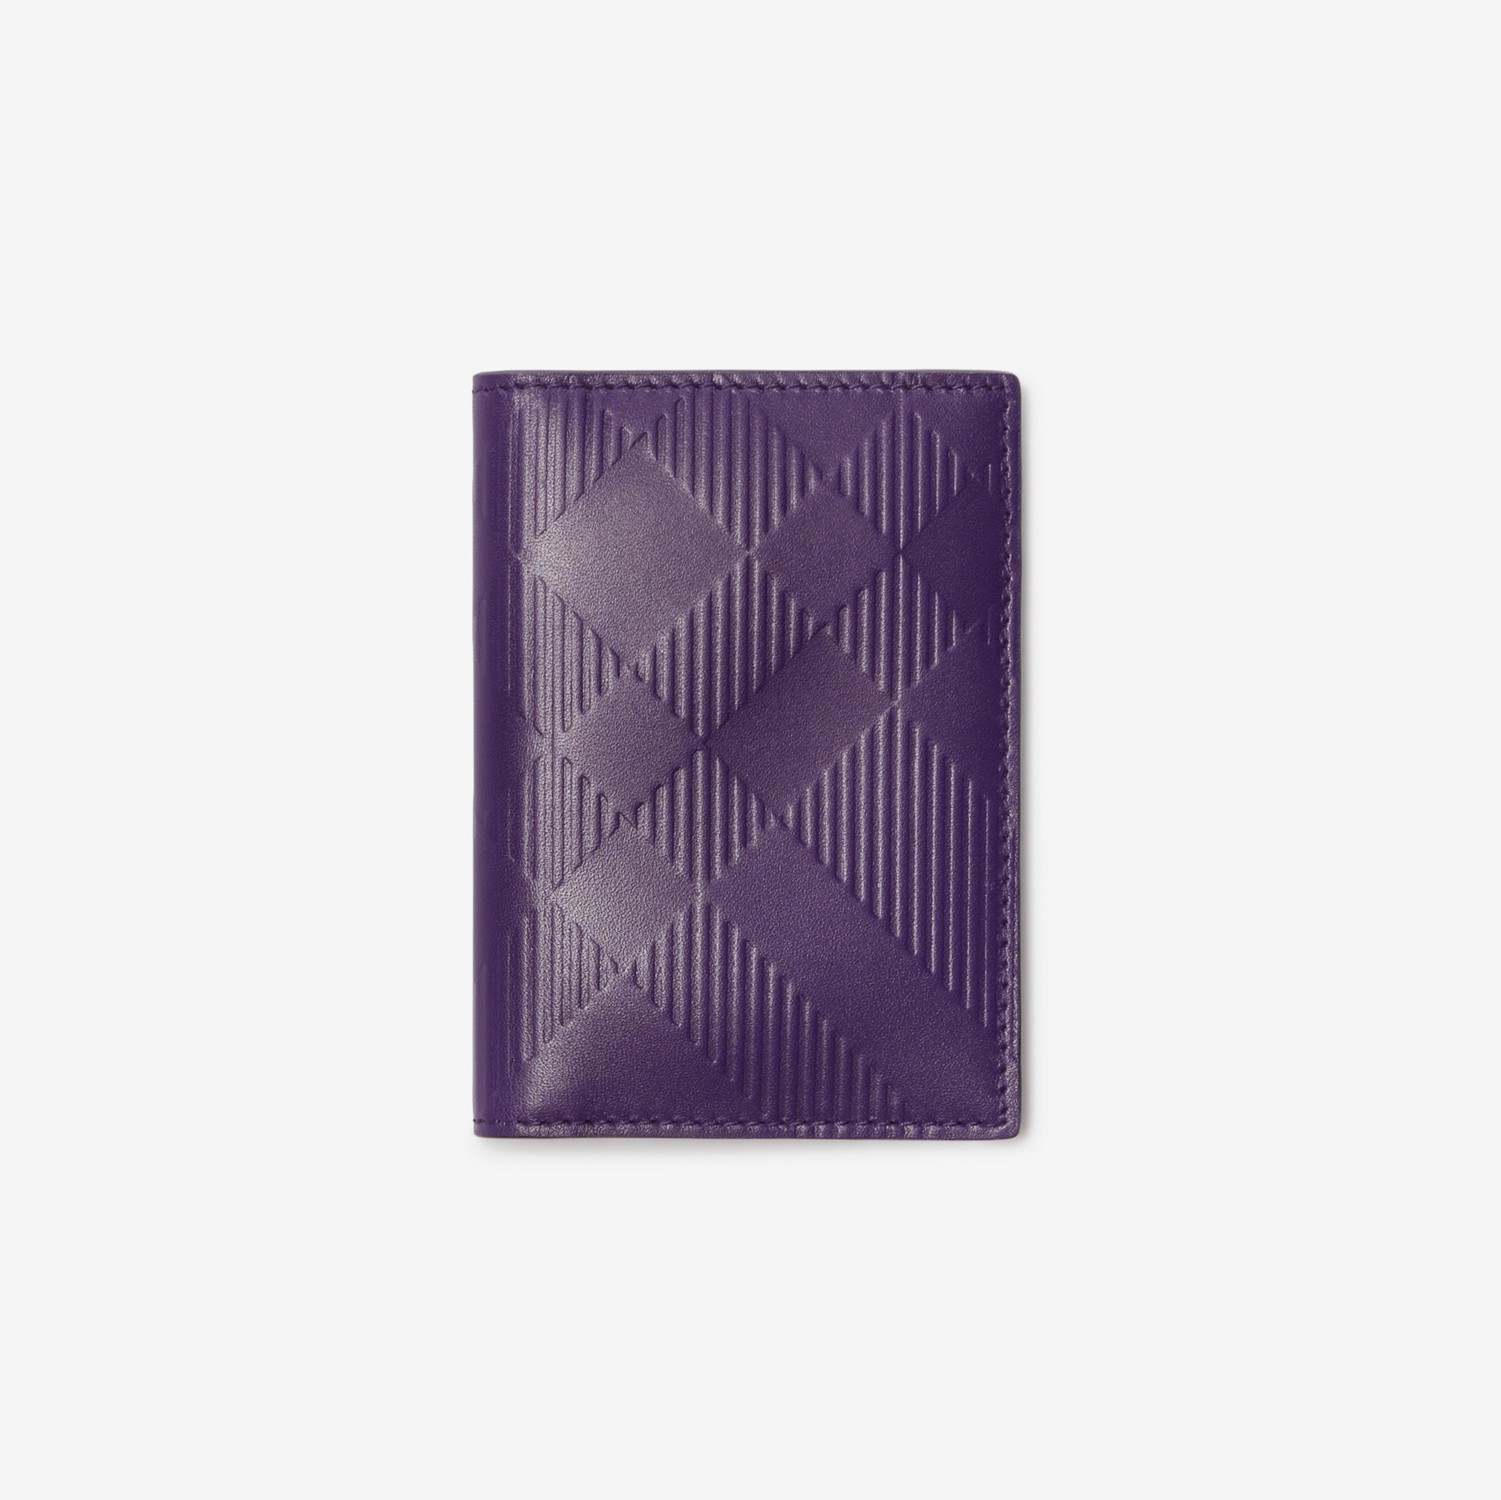 Check Leather Folding Card Case in Royal - Men